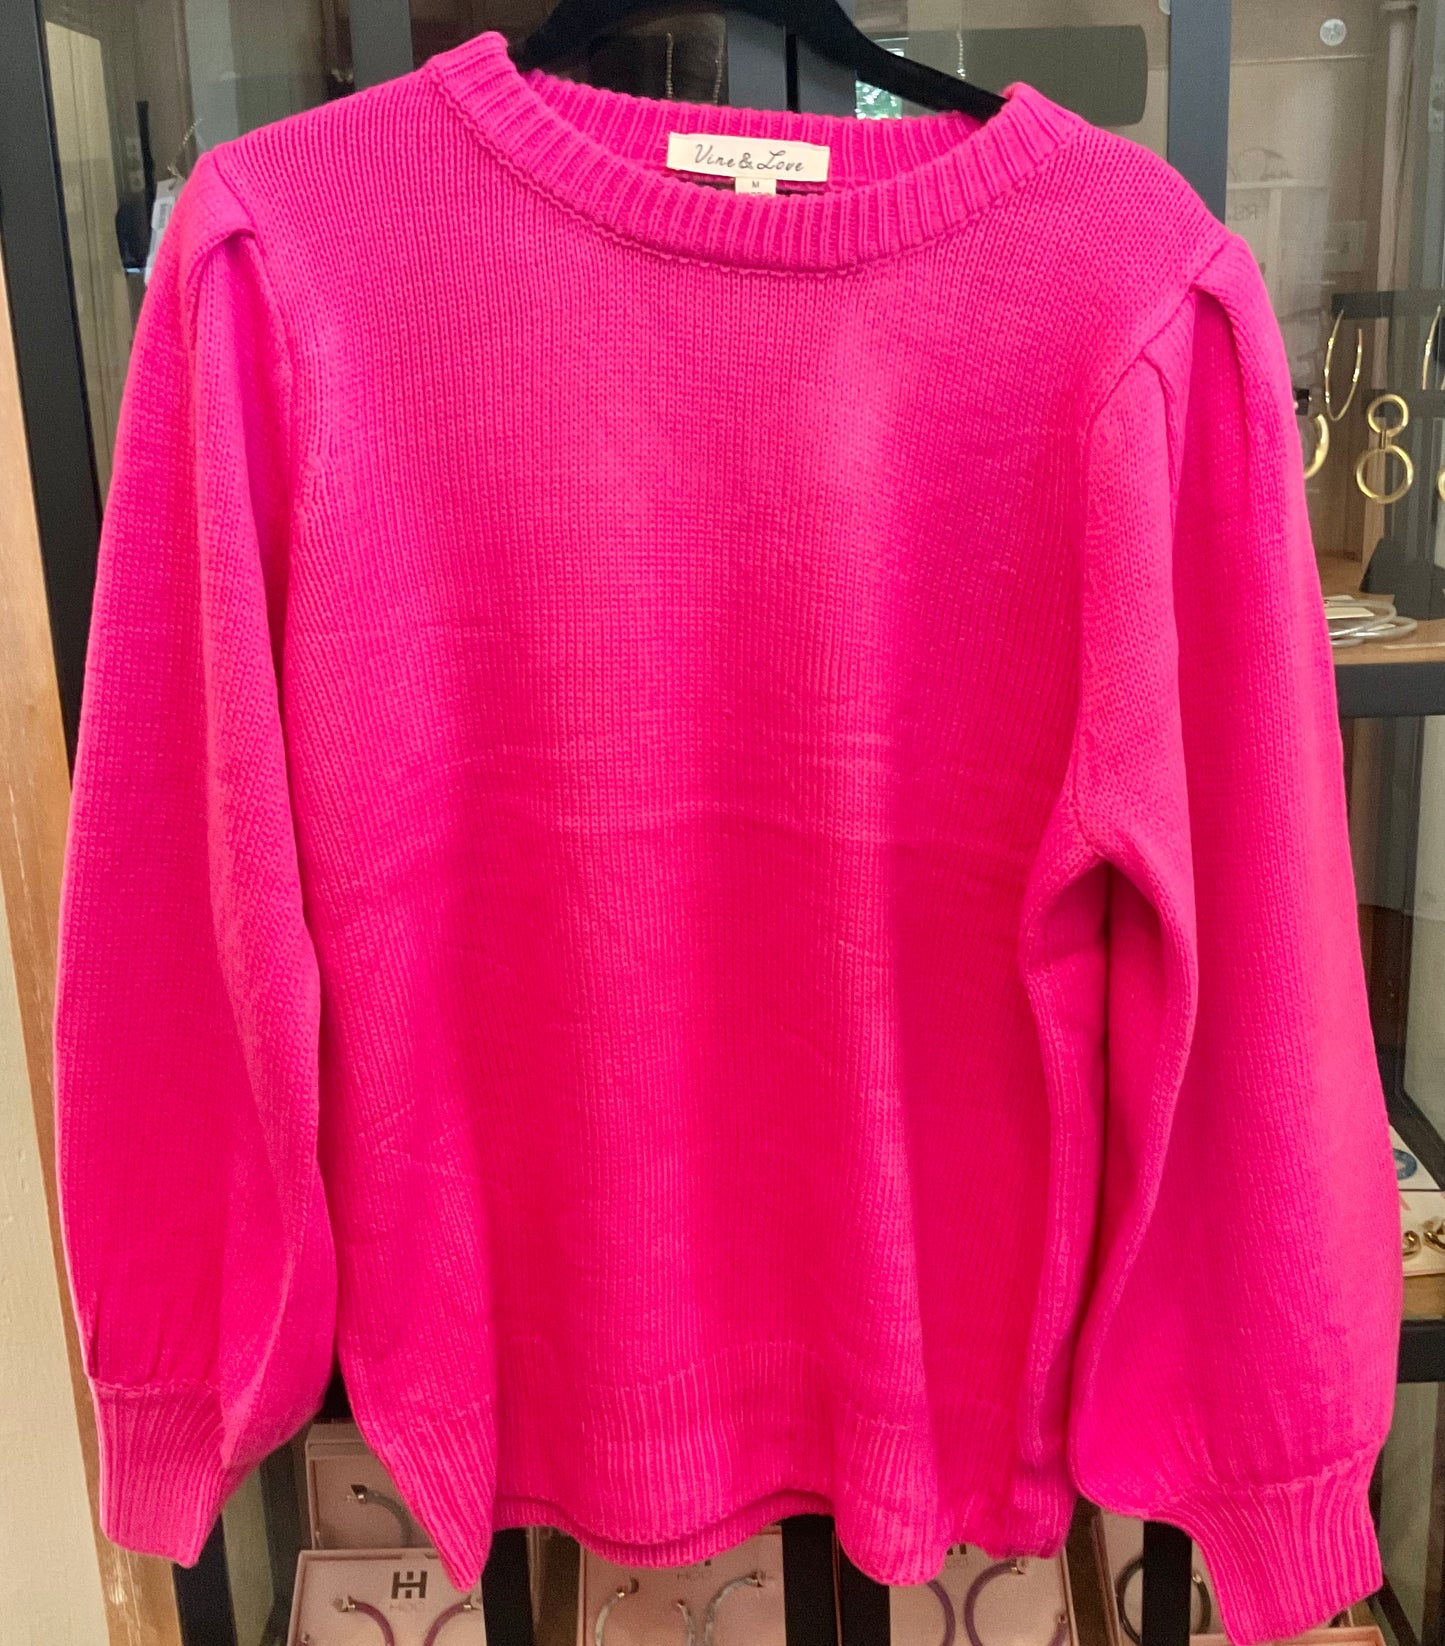 Popping Pink sweater